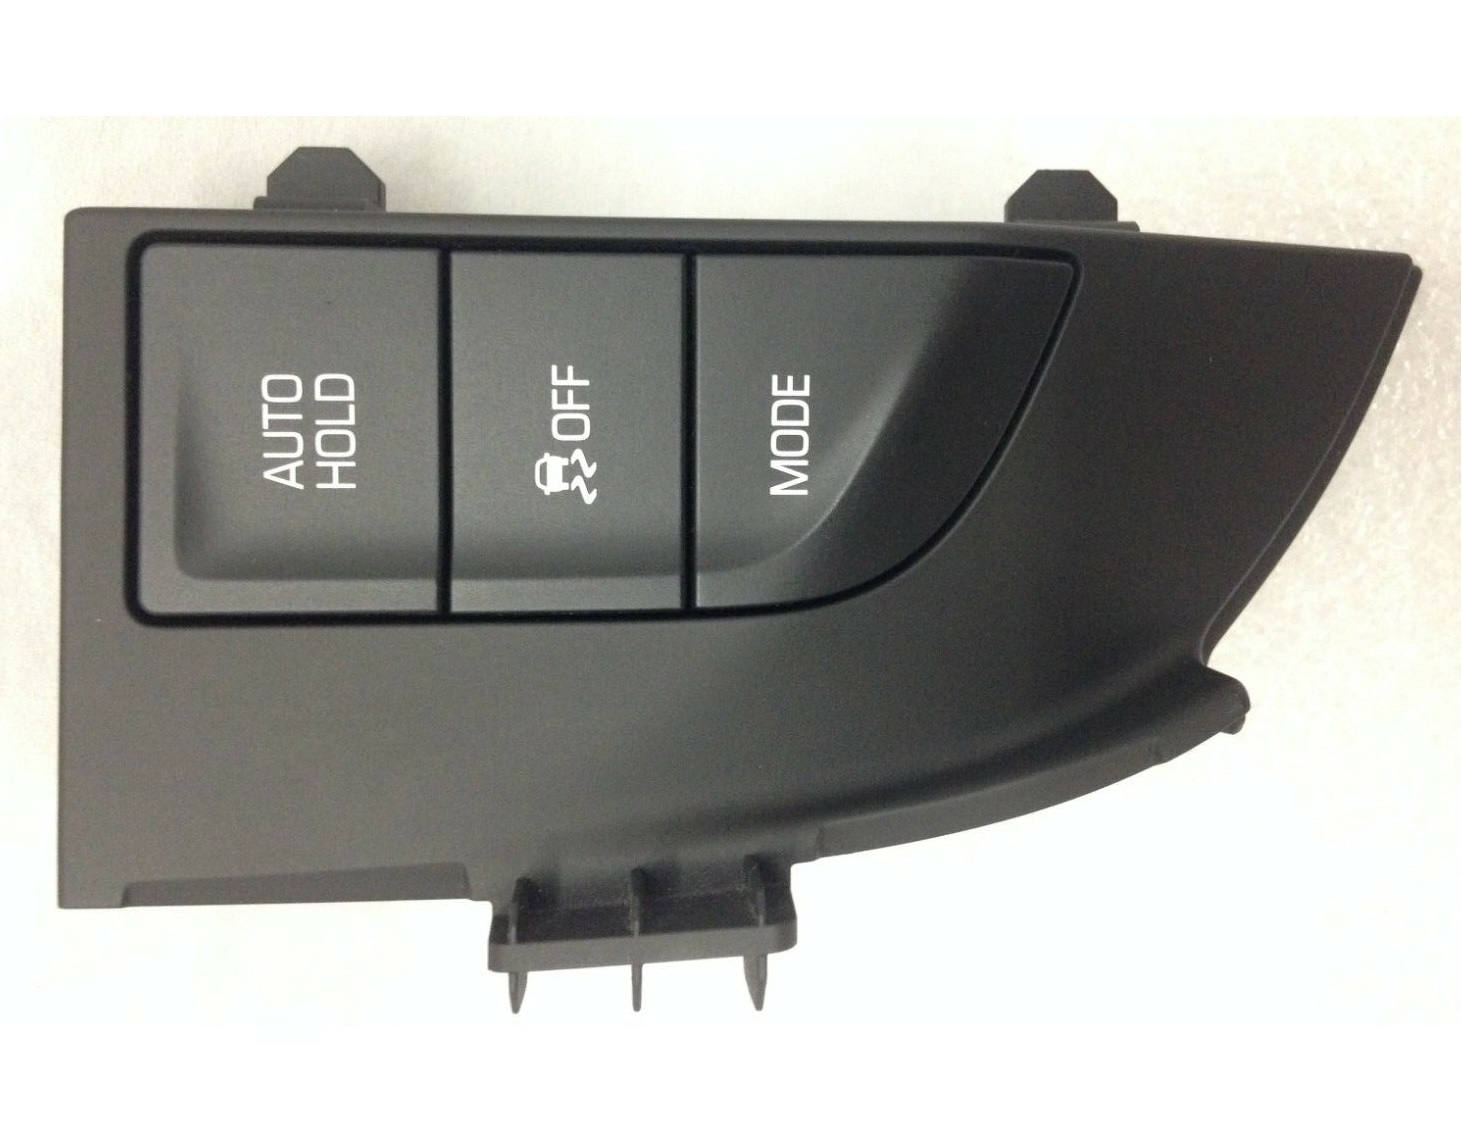 Cadillac CT6 2016+ console MODE Traction Control Hold button mod